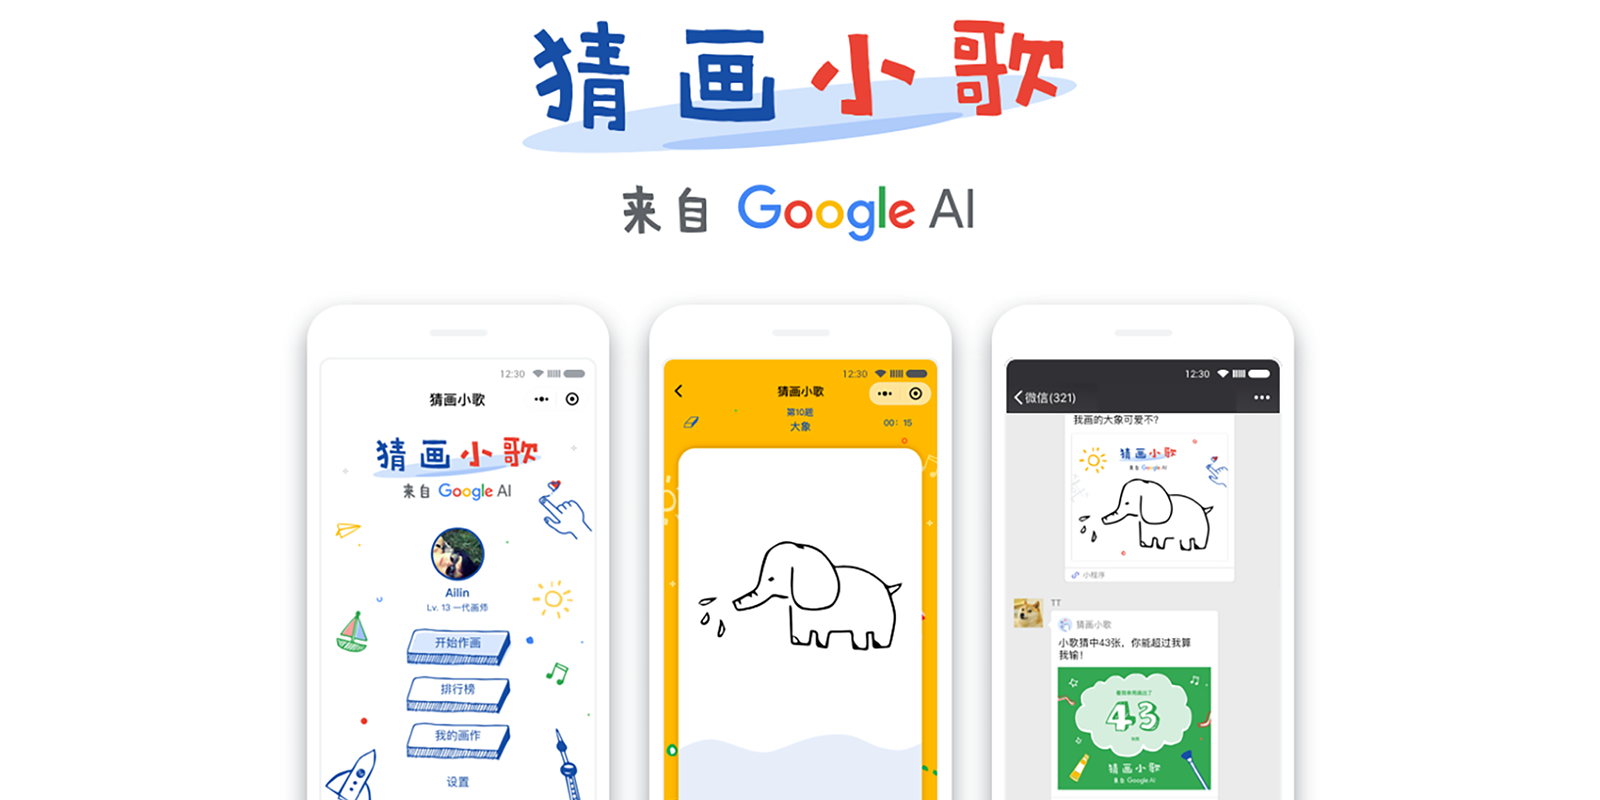 Google launches a WeChat mini game in China | South China Morning Post